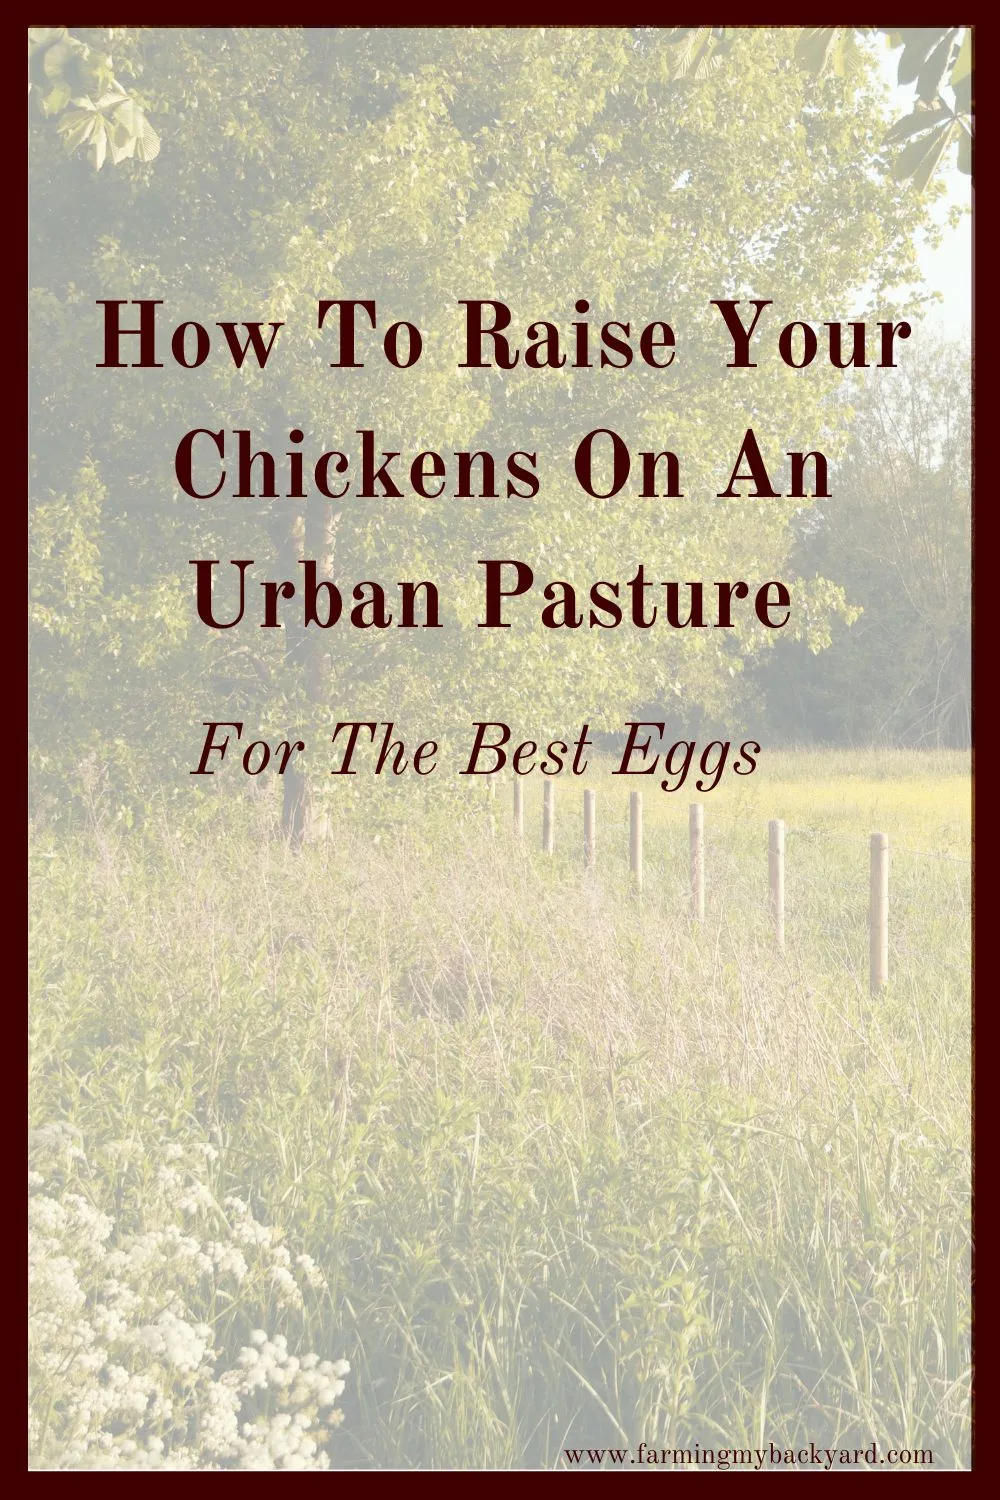 In a small space the common lawn can double as the urban pasture. Let you chickens eat this bounty for the best pastured eggs!